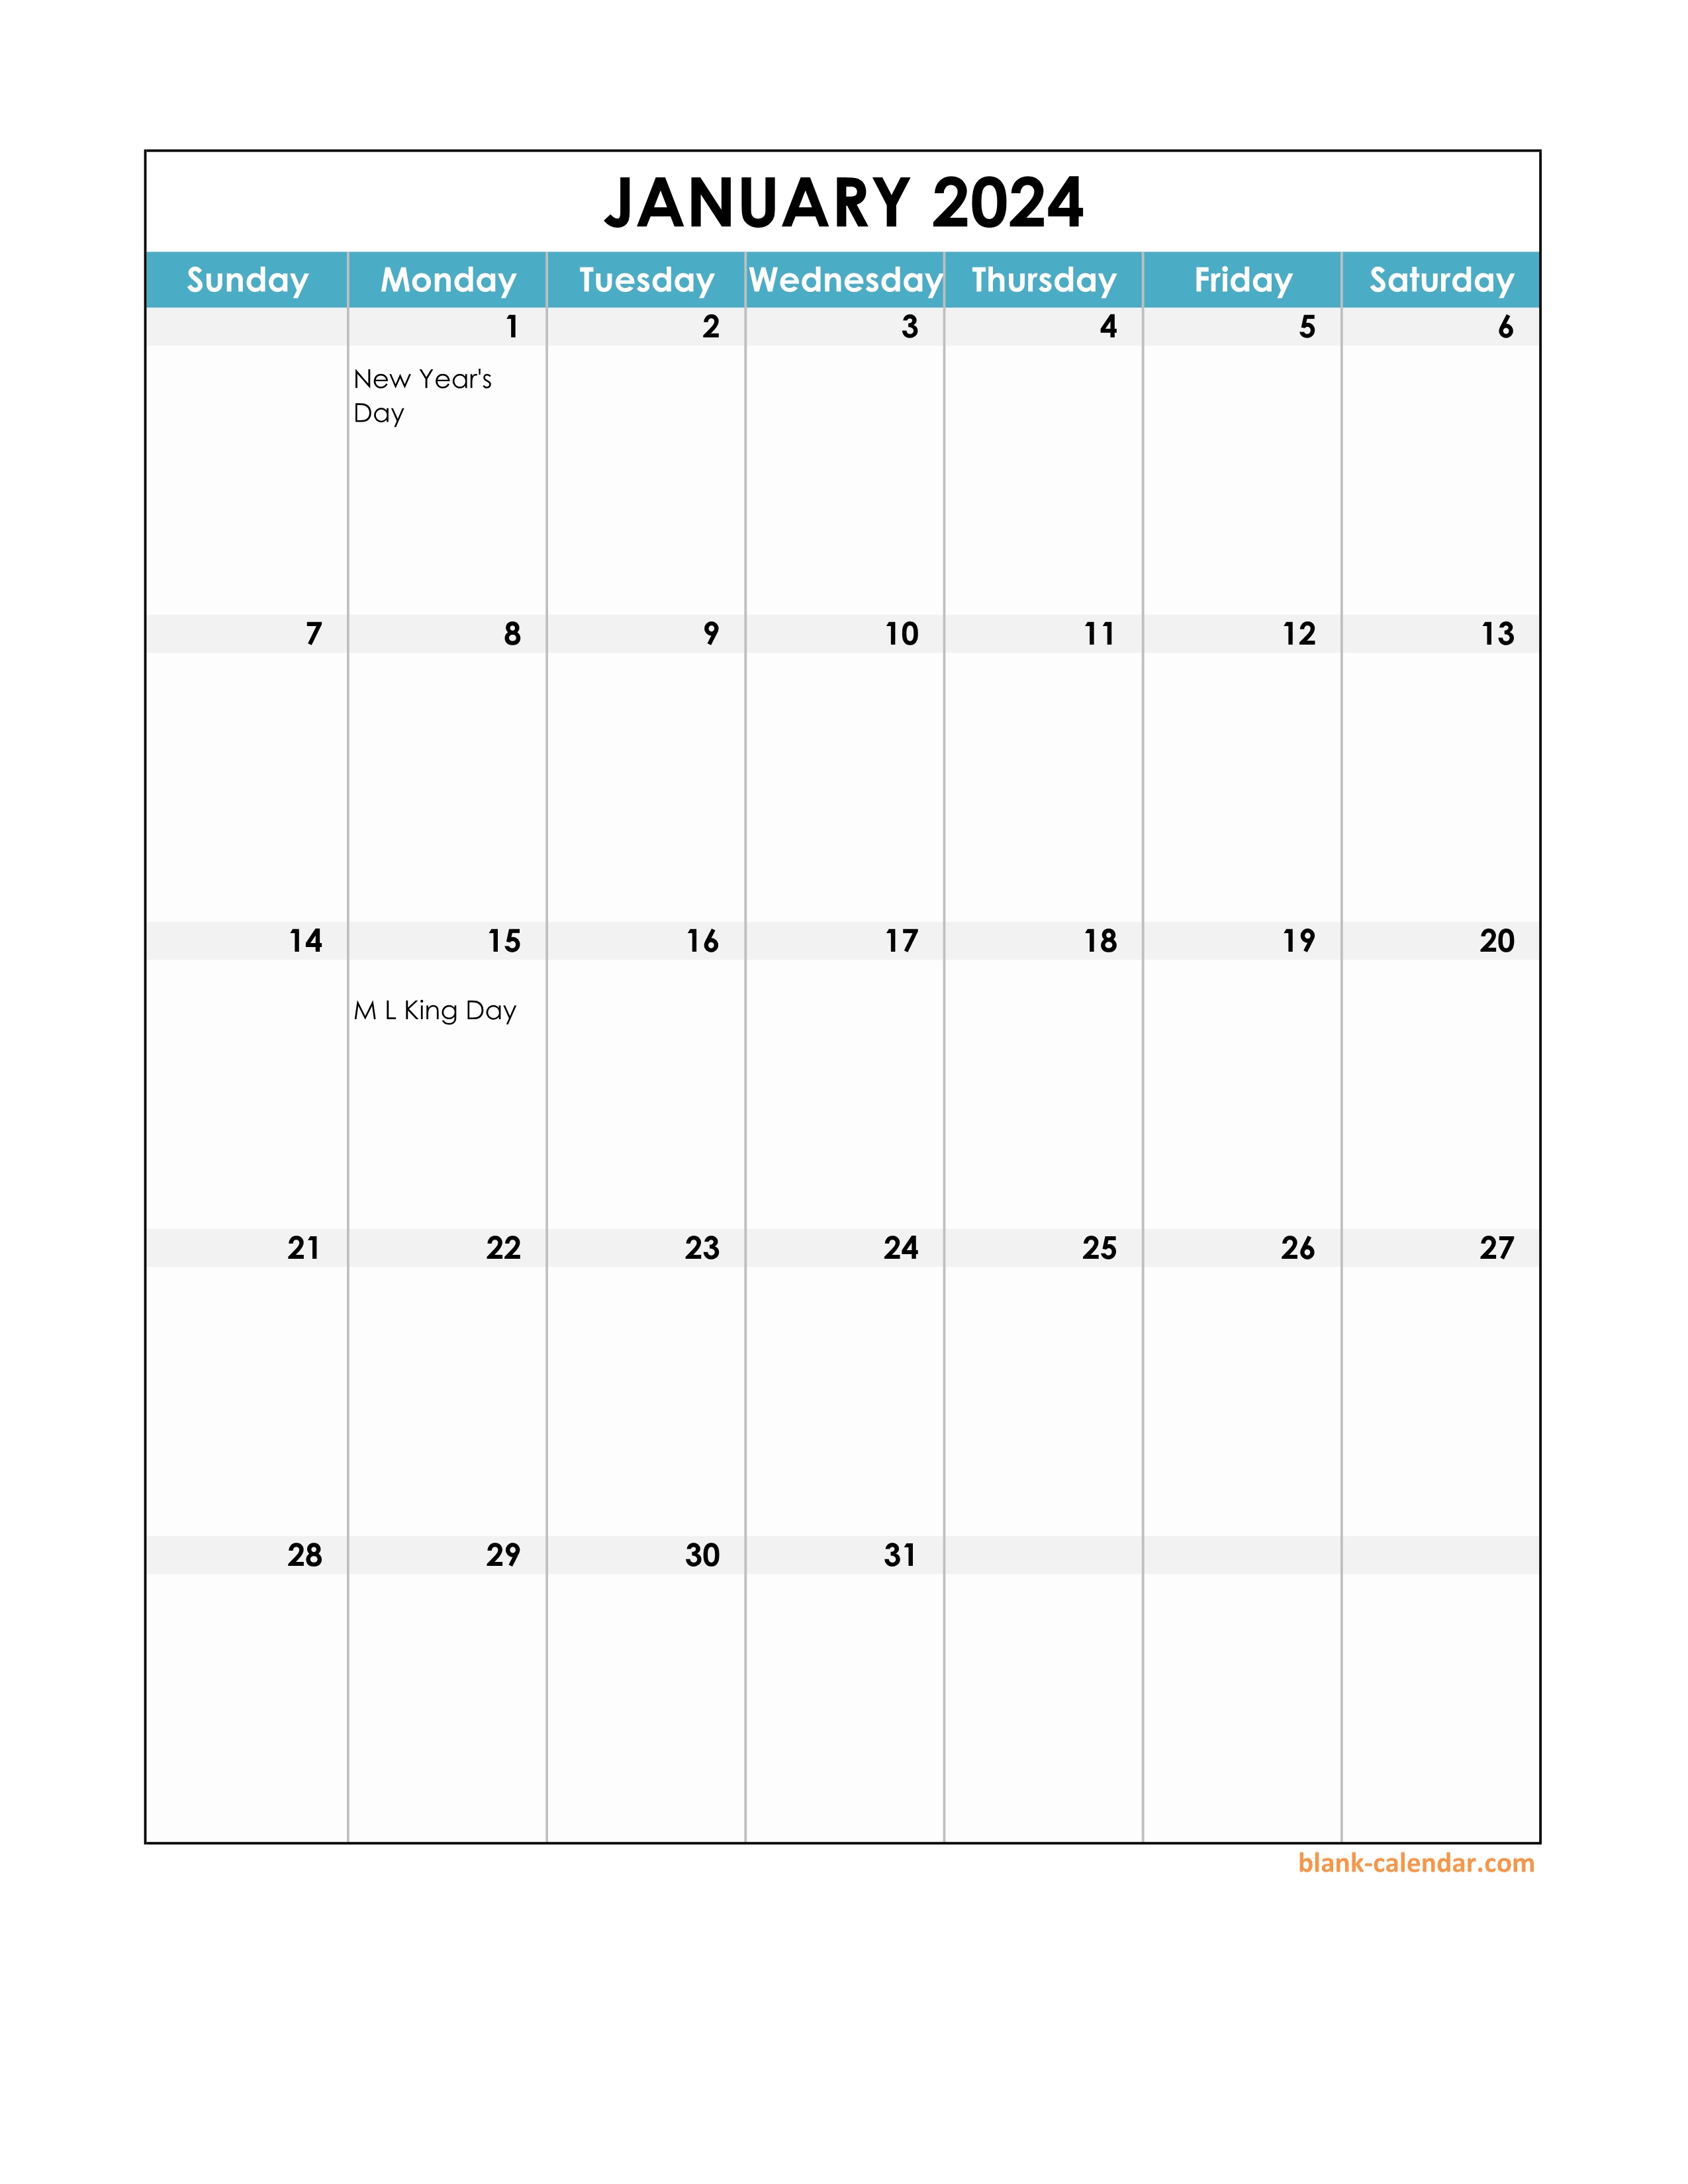 free-download-2024-excel-calendar-full-page-table-grid-us-holidays